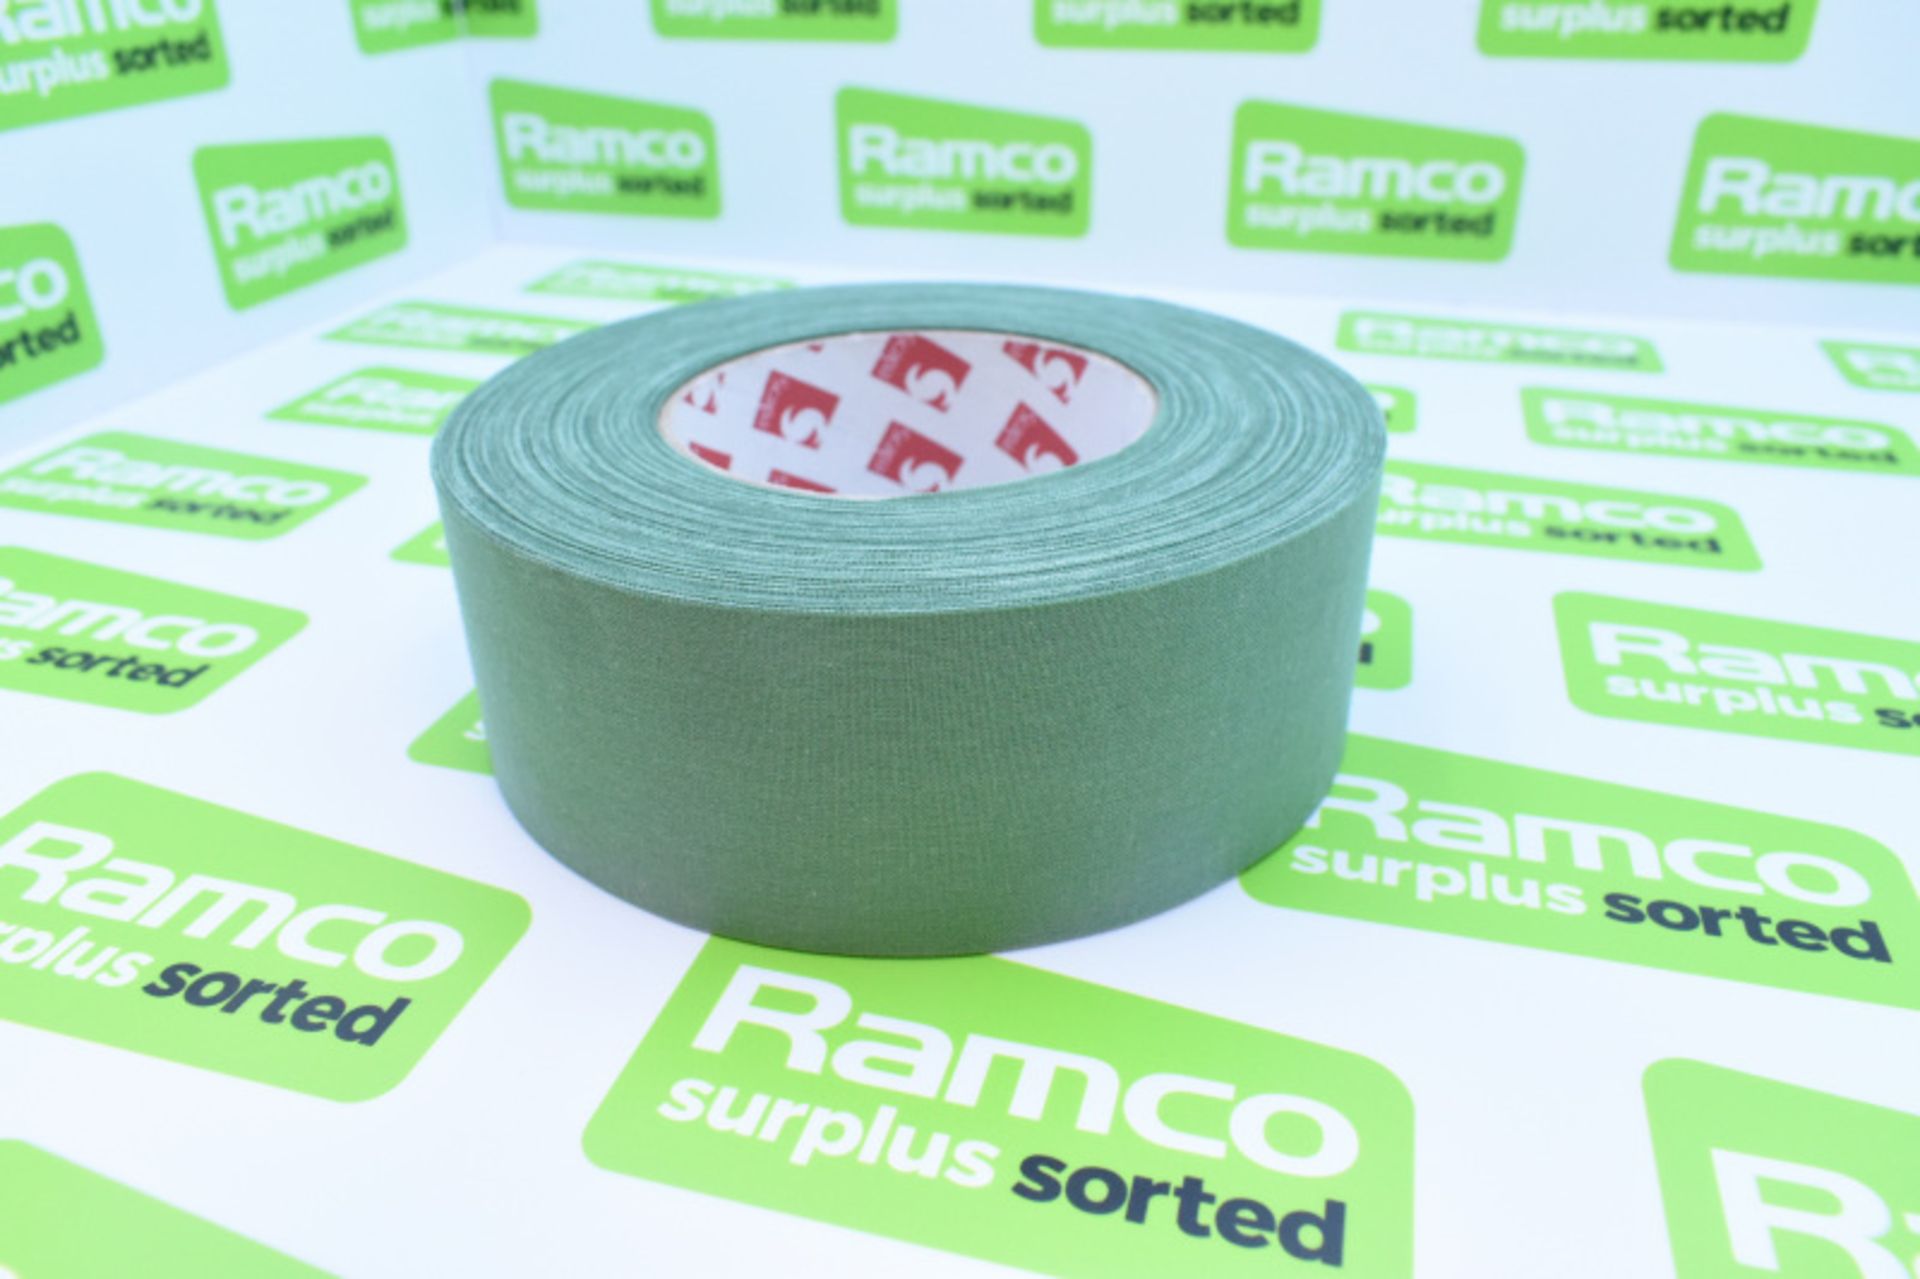 Scapa 3302 Pro Tape - Olive Green - 50mm x 50M rolls - 16 rolls per box - 2 boxes - manufactured 17/ - Image 3 of 4